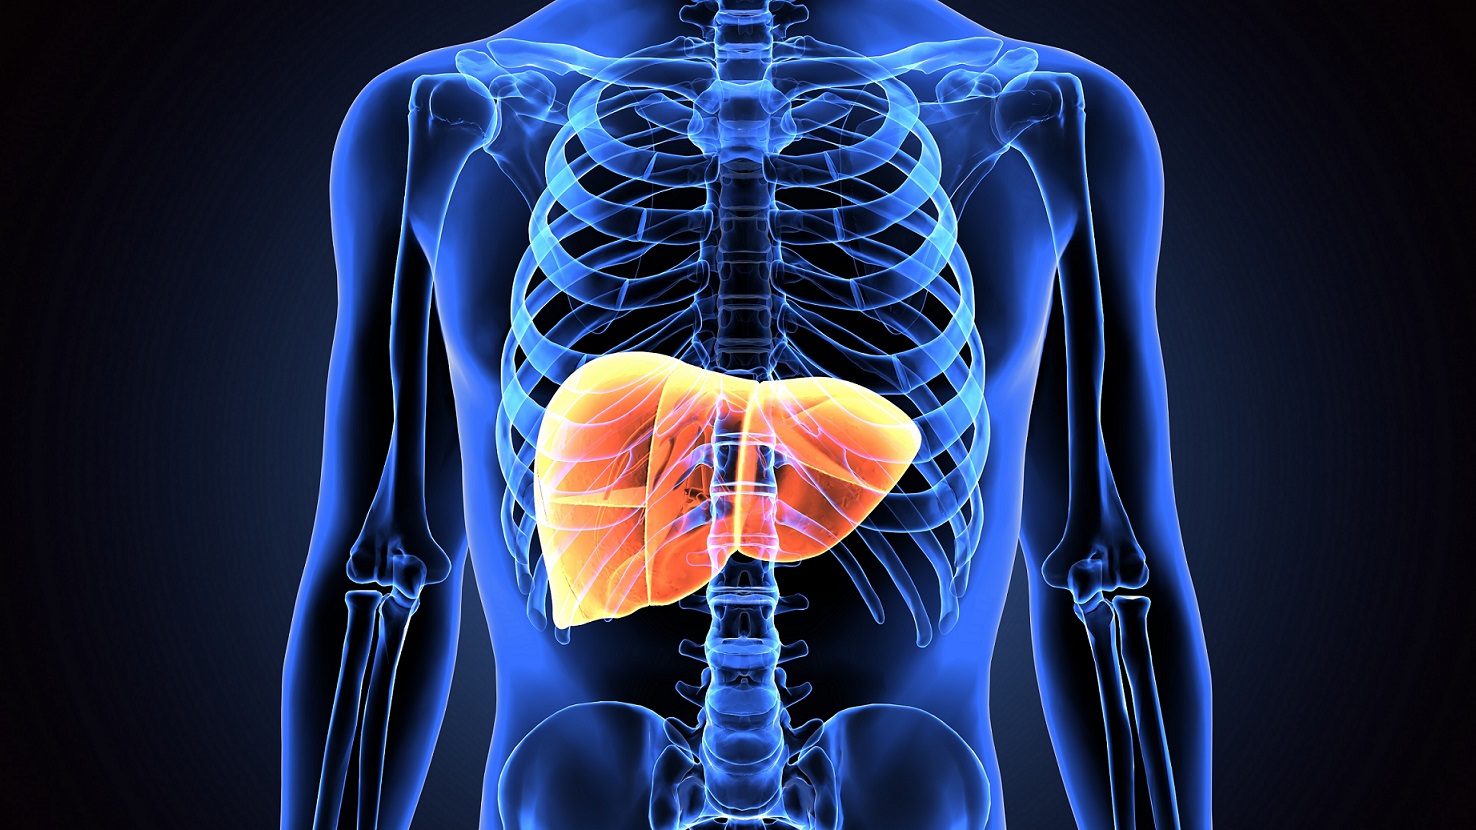 Liver Cancer- What it is and what are its Risk Factors?